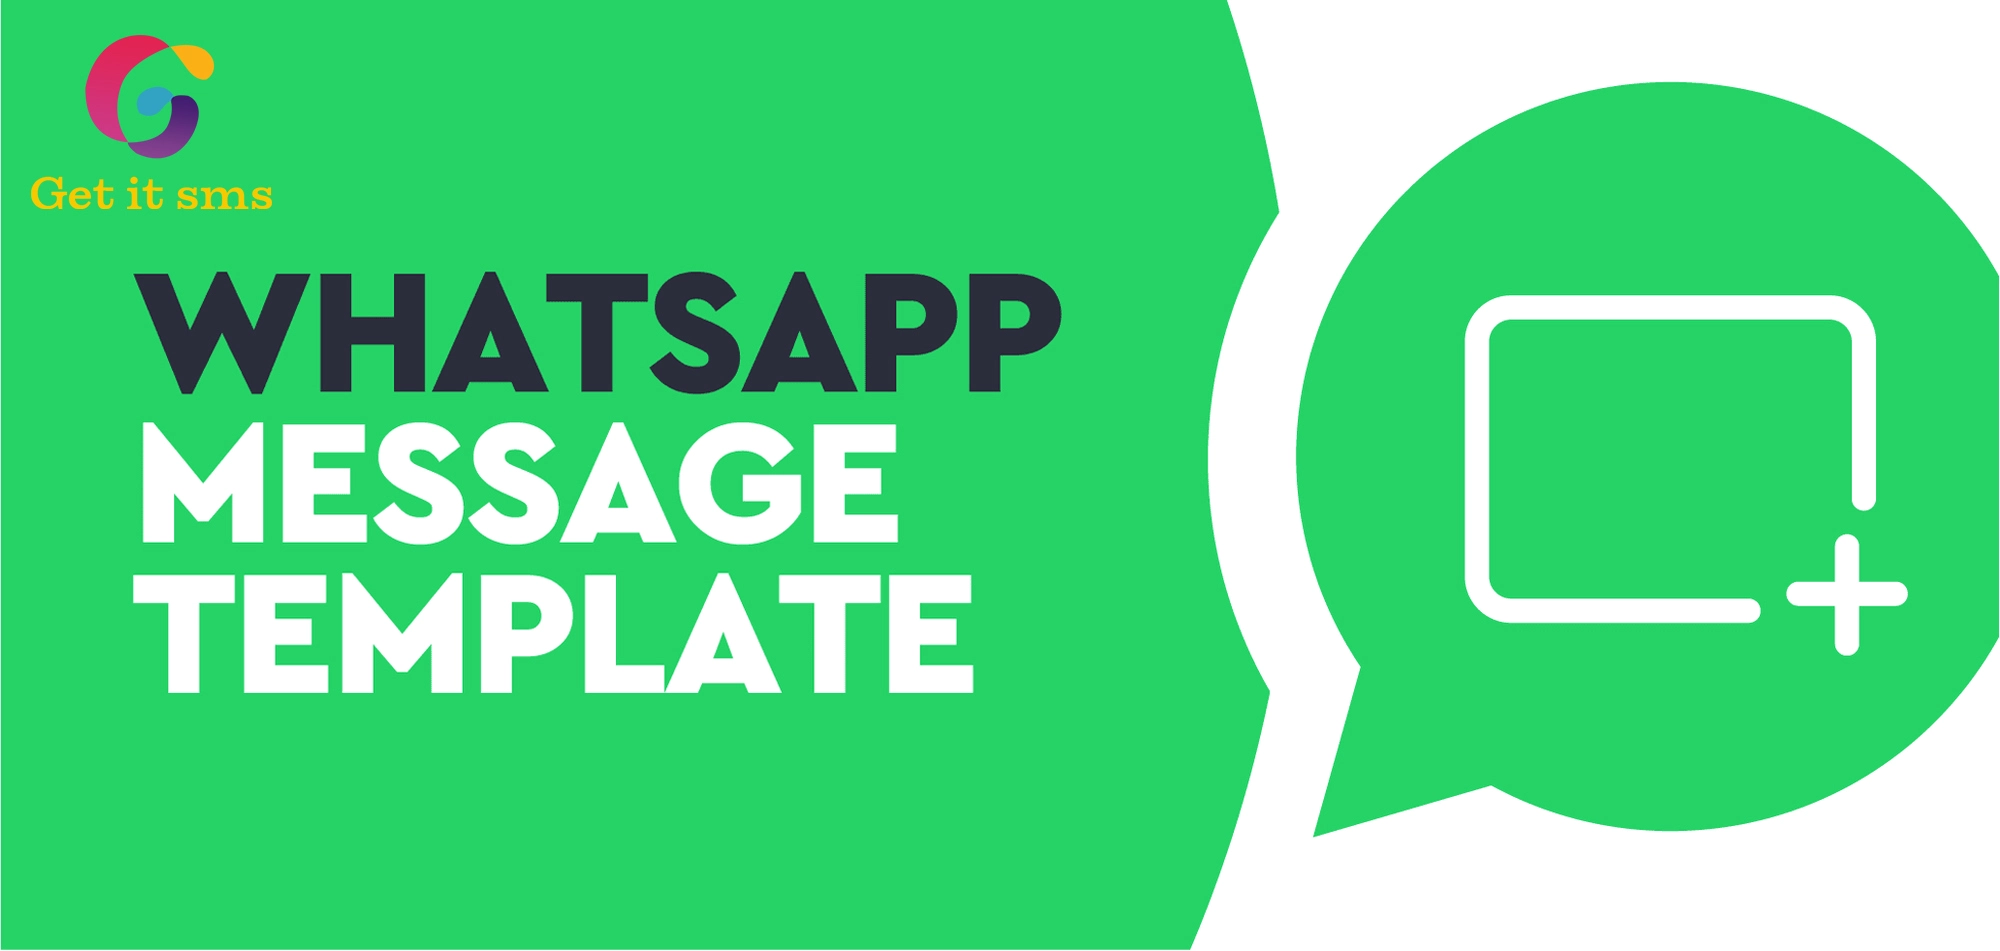 WhatsApp Message Template: The Ultimate Guide